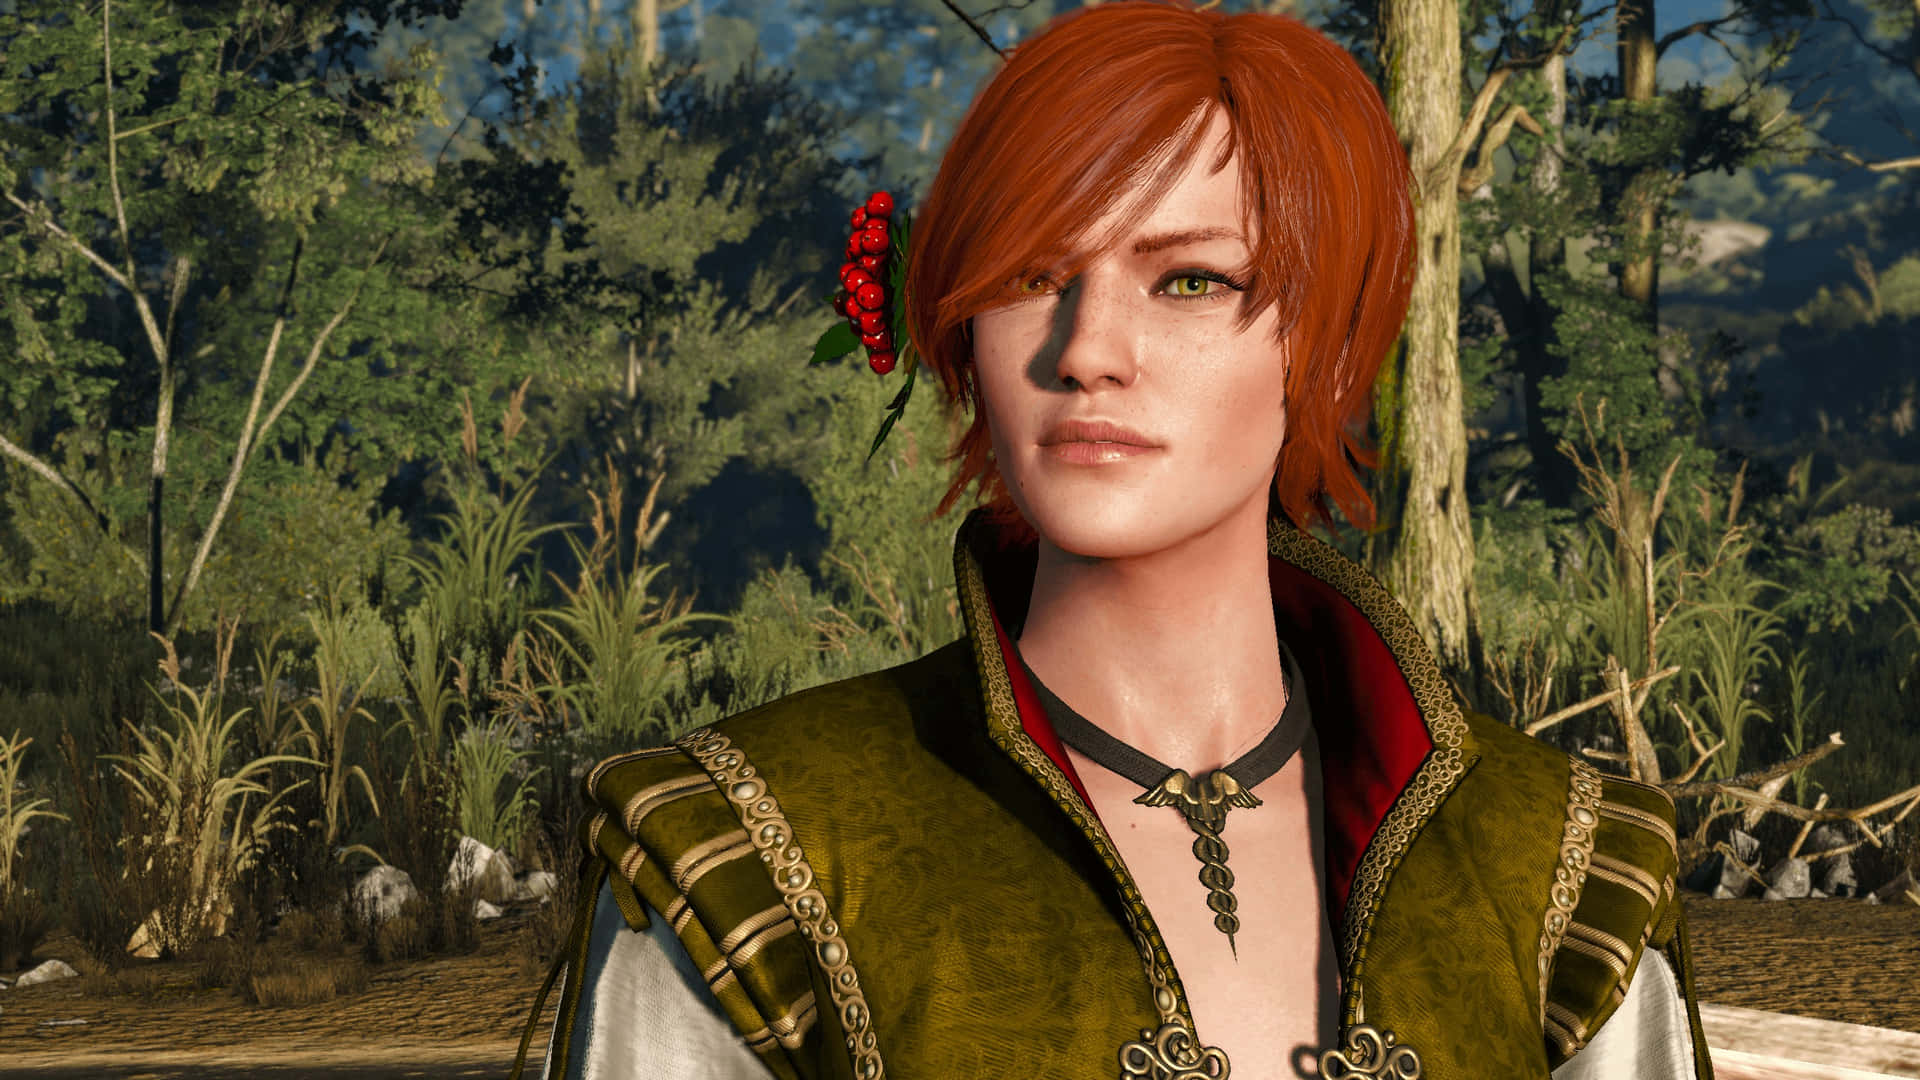 Shani From The Witcher Series Deep In Thought Wallpaper